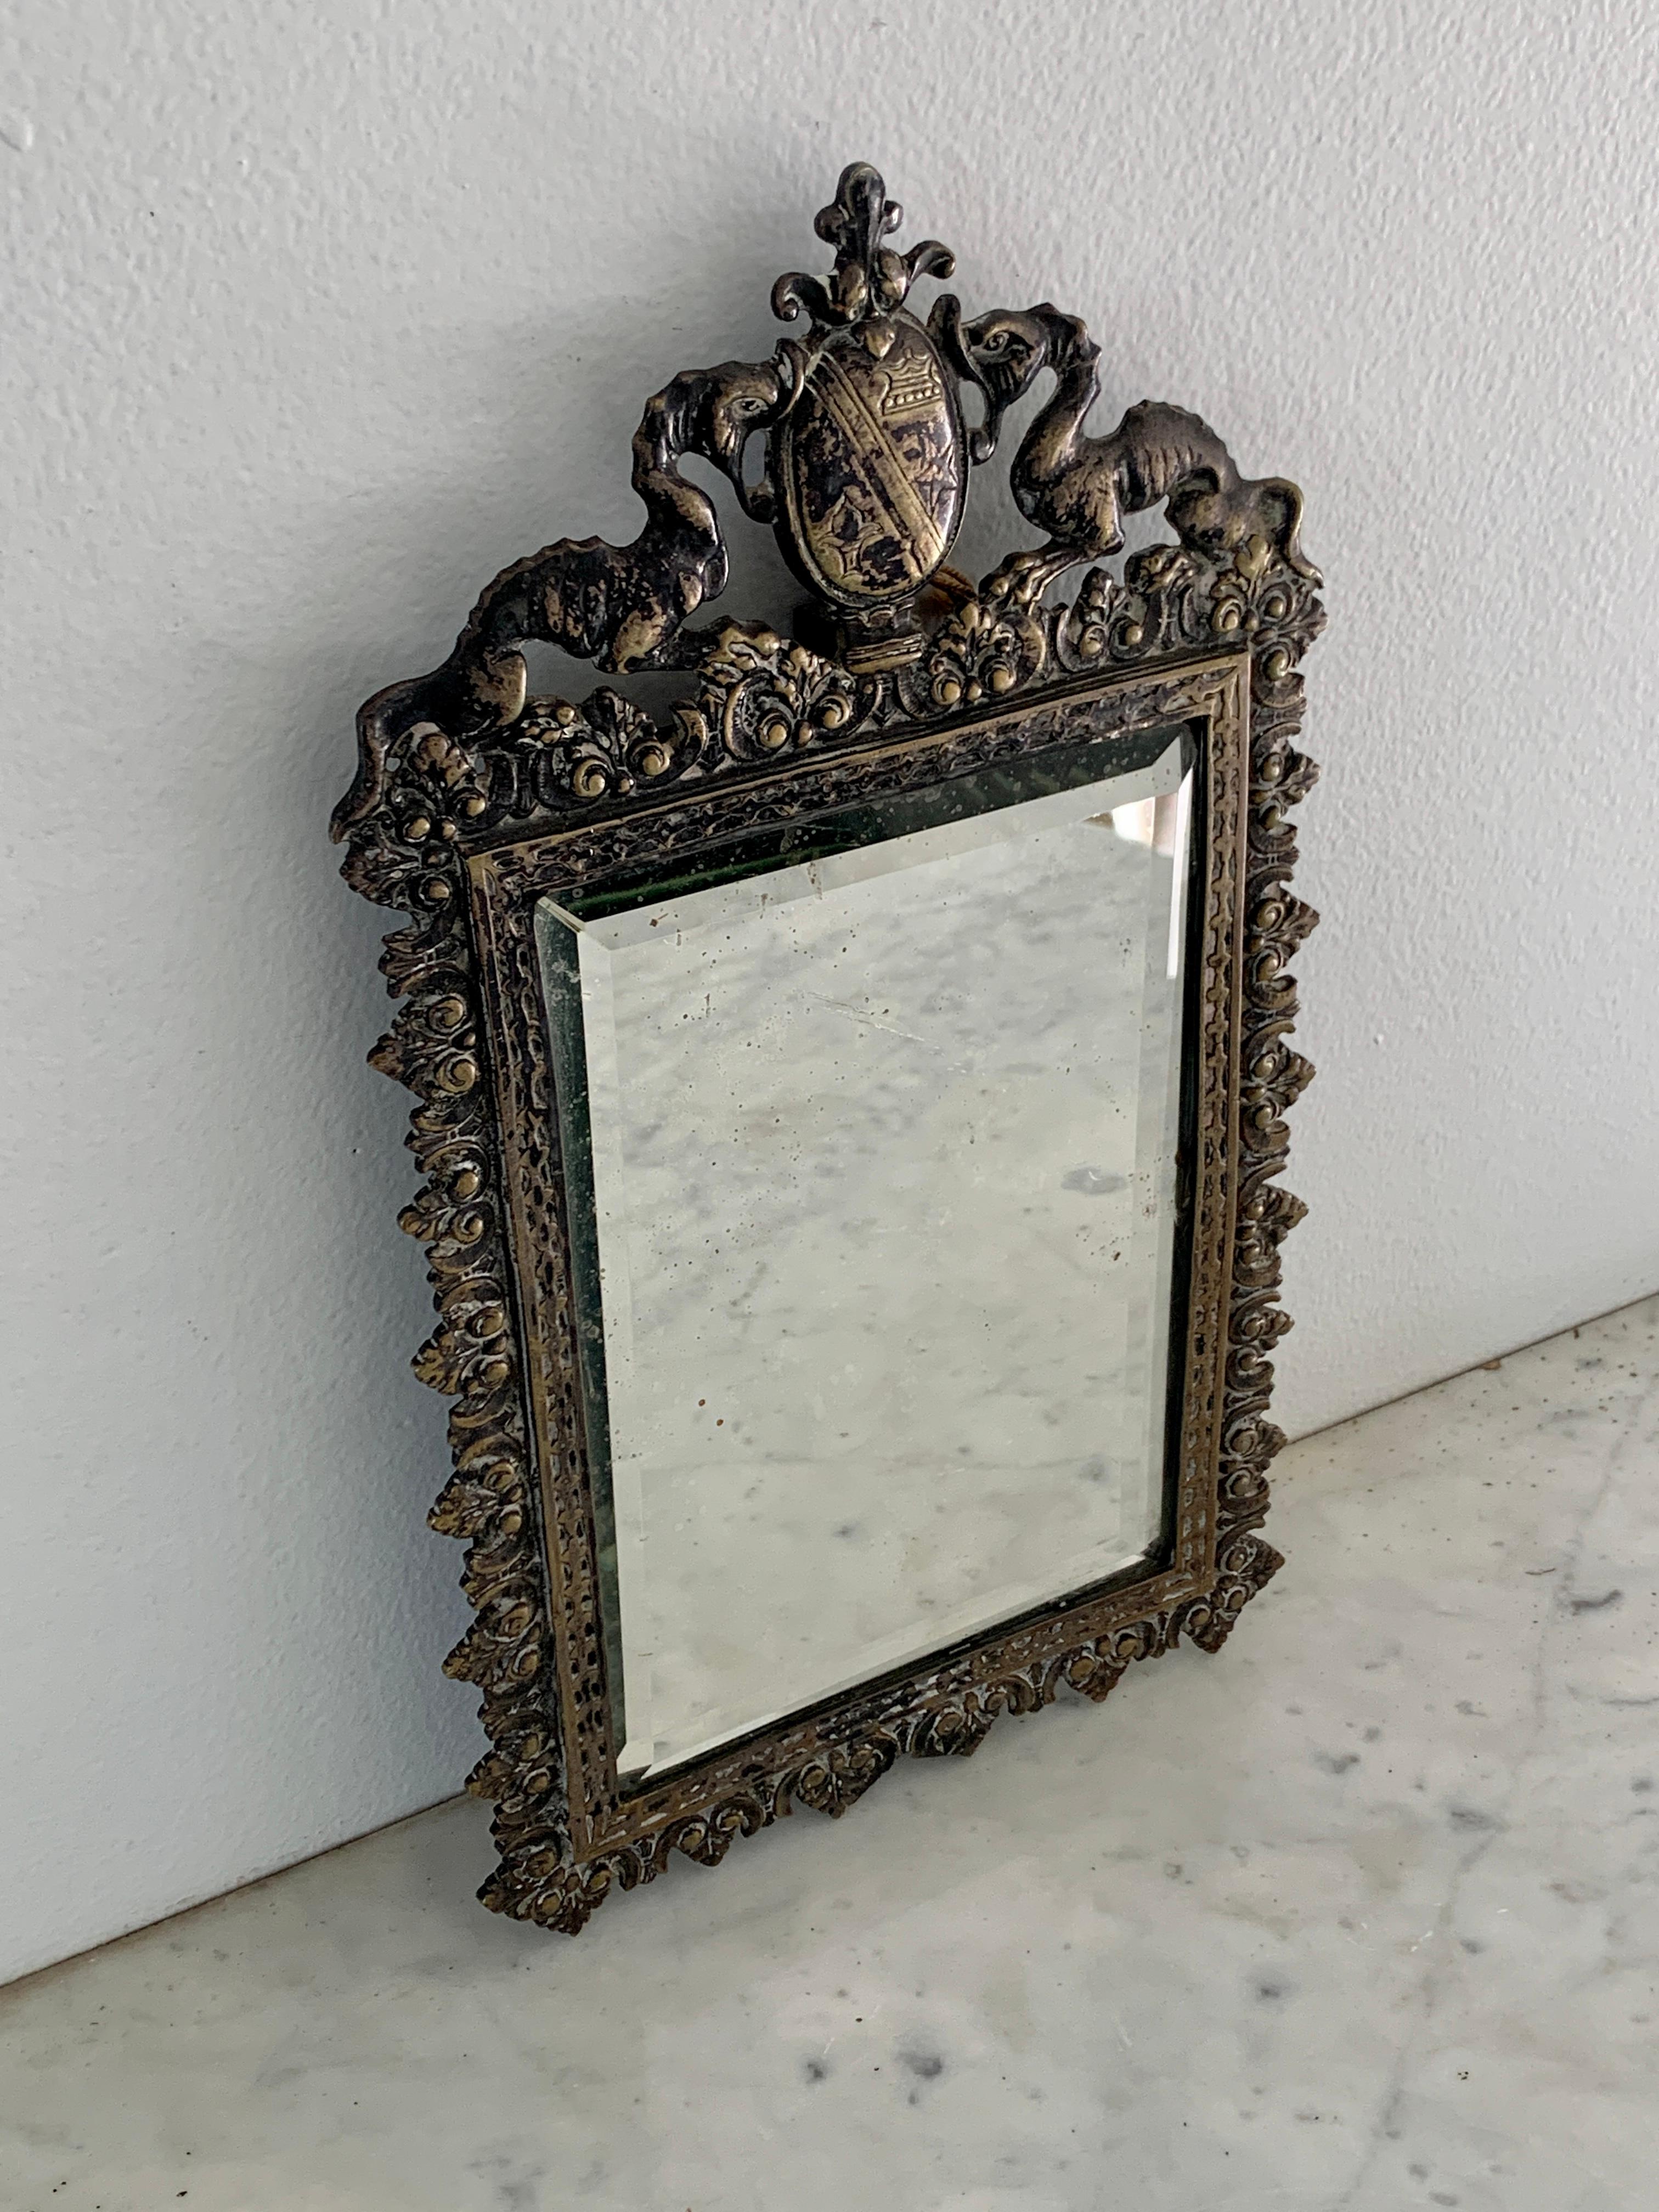 A stunning antique tabletop or wall mirror featuring two mythological dragons holding a coat of arms or family crest with a crown, star, and fleur-de-lis

Italy, Early 20th Century

Cast brass, with antique beveled mirror.

Measures: 7